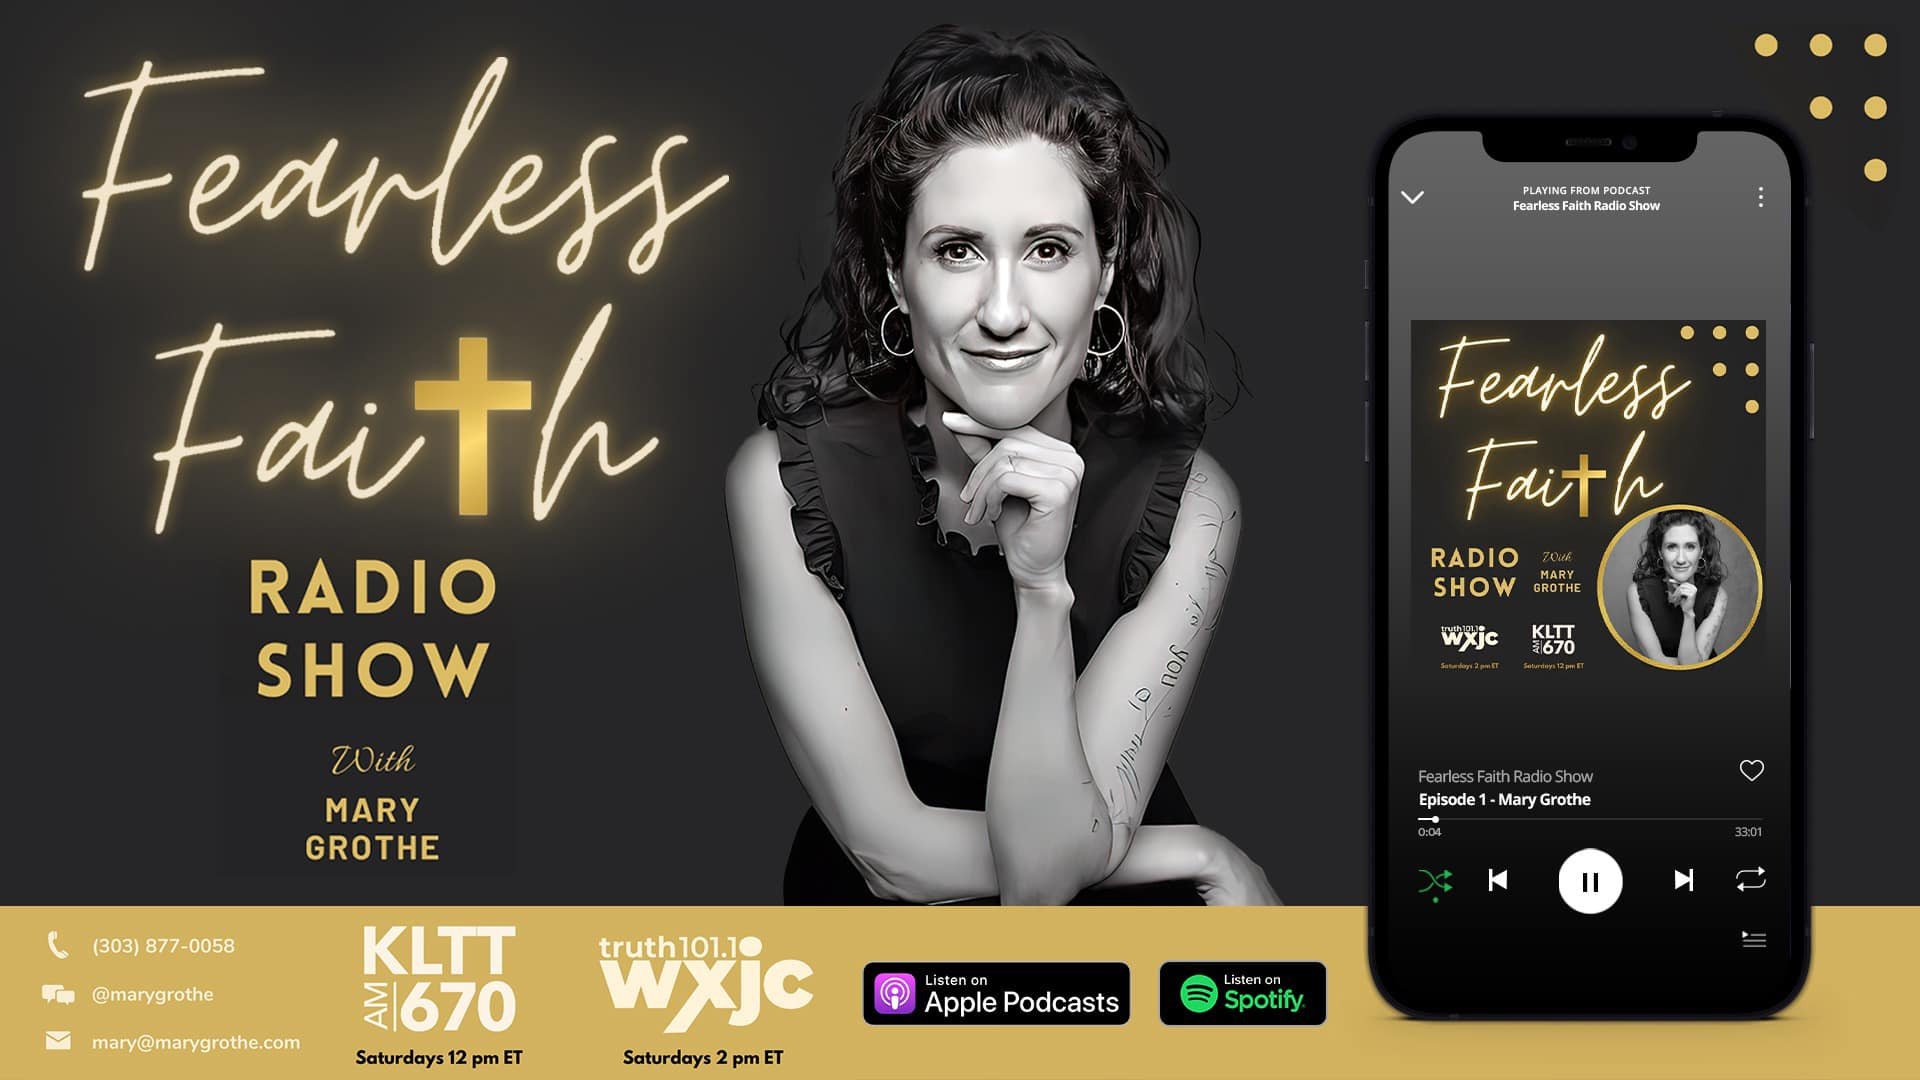 Hey friends!! I'm going to be interviewed this Saturday at 11am/12 pm ET on the Fearless Faith Radio Show with Mary Grothe.  Hope you can join us!!